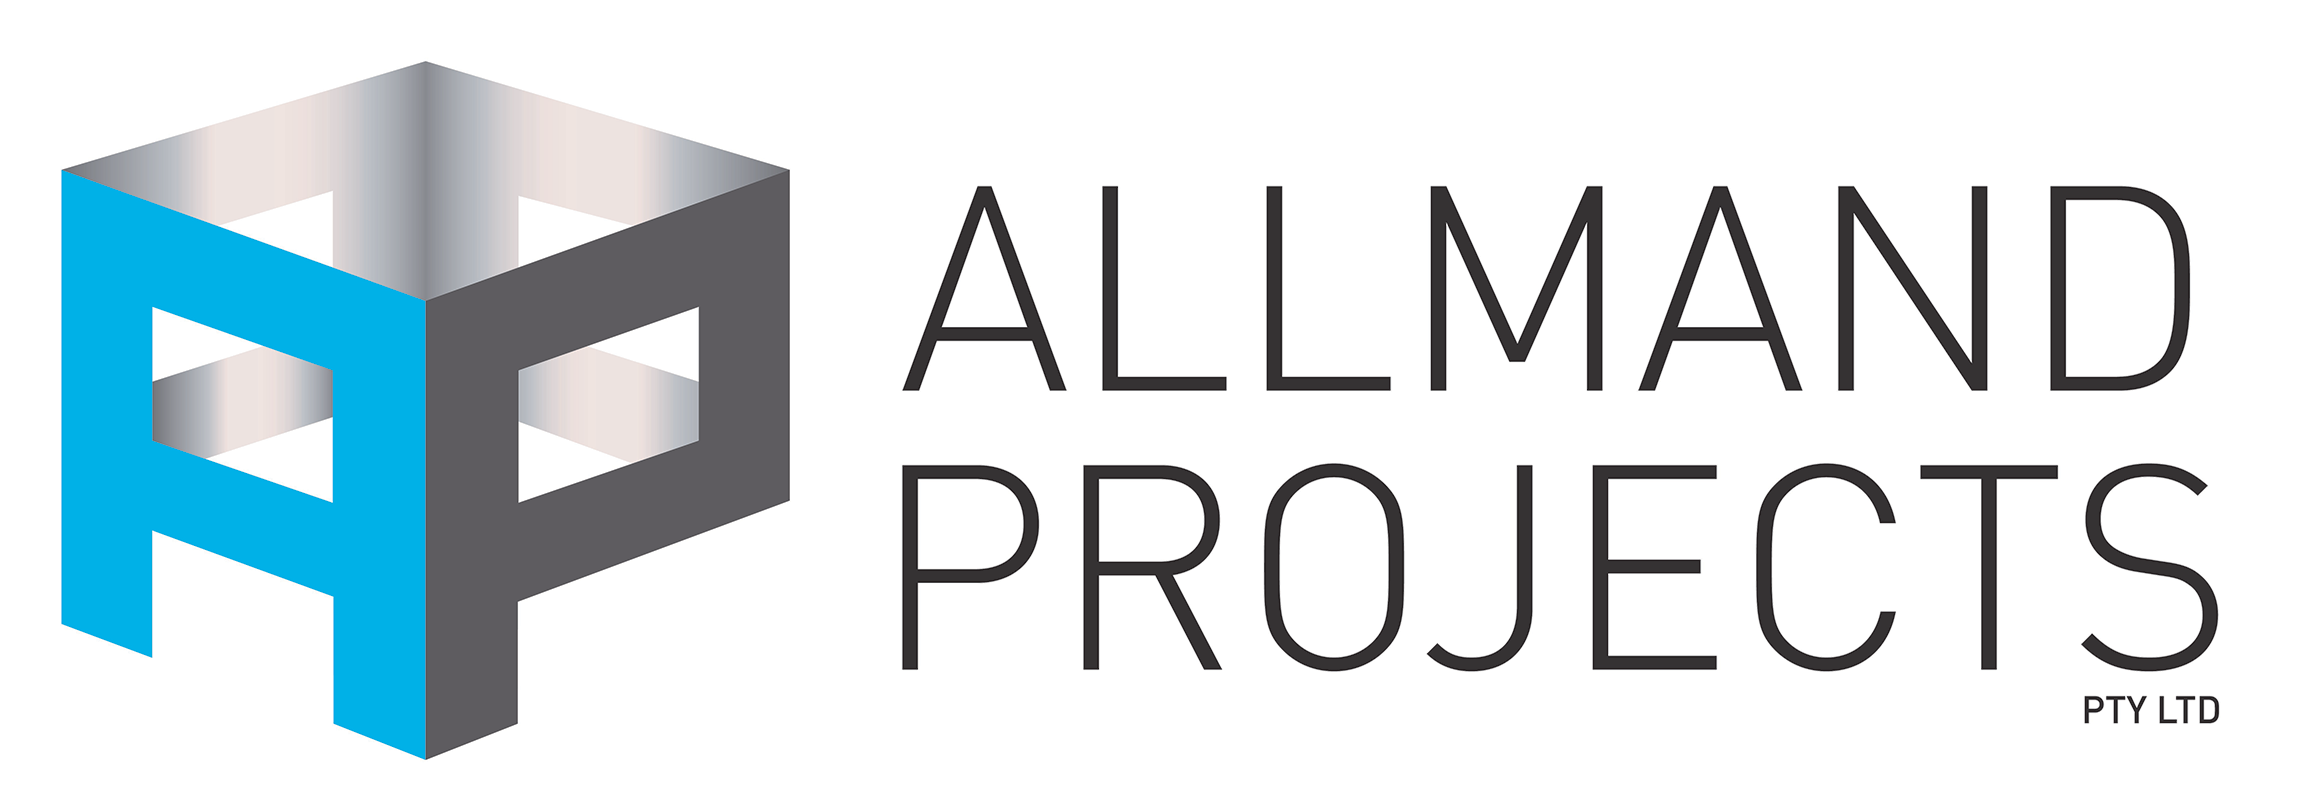 ALLMAND PROJECTS